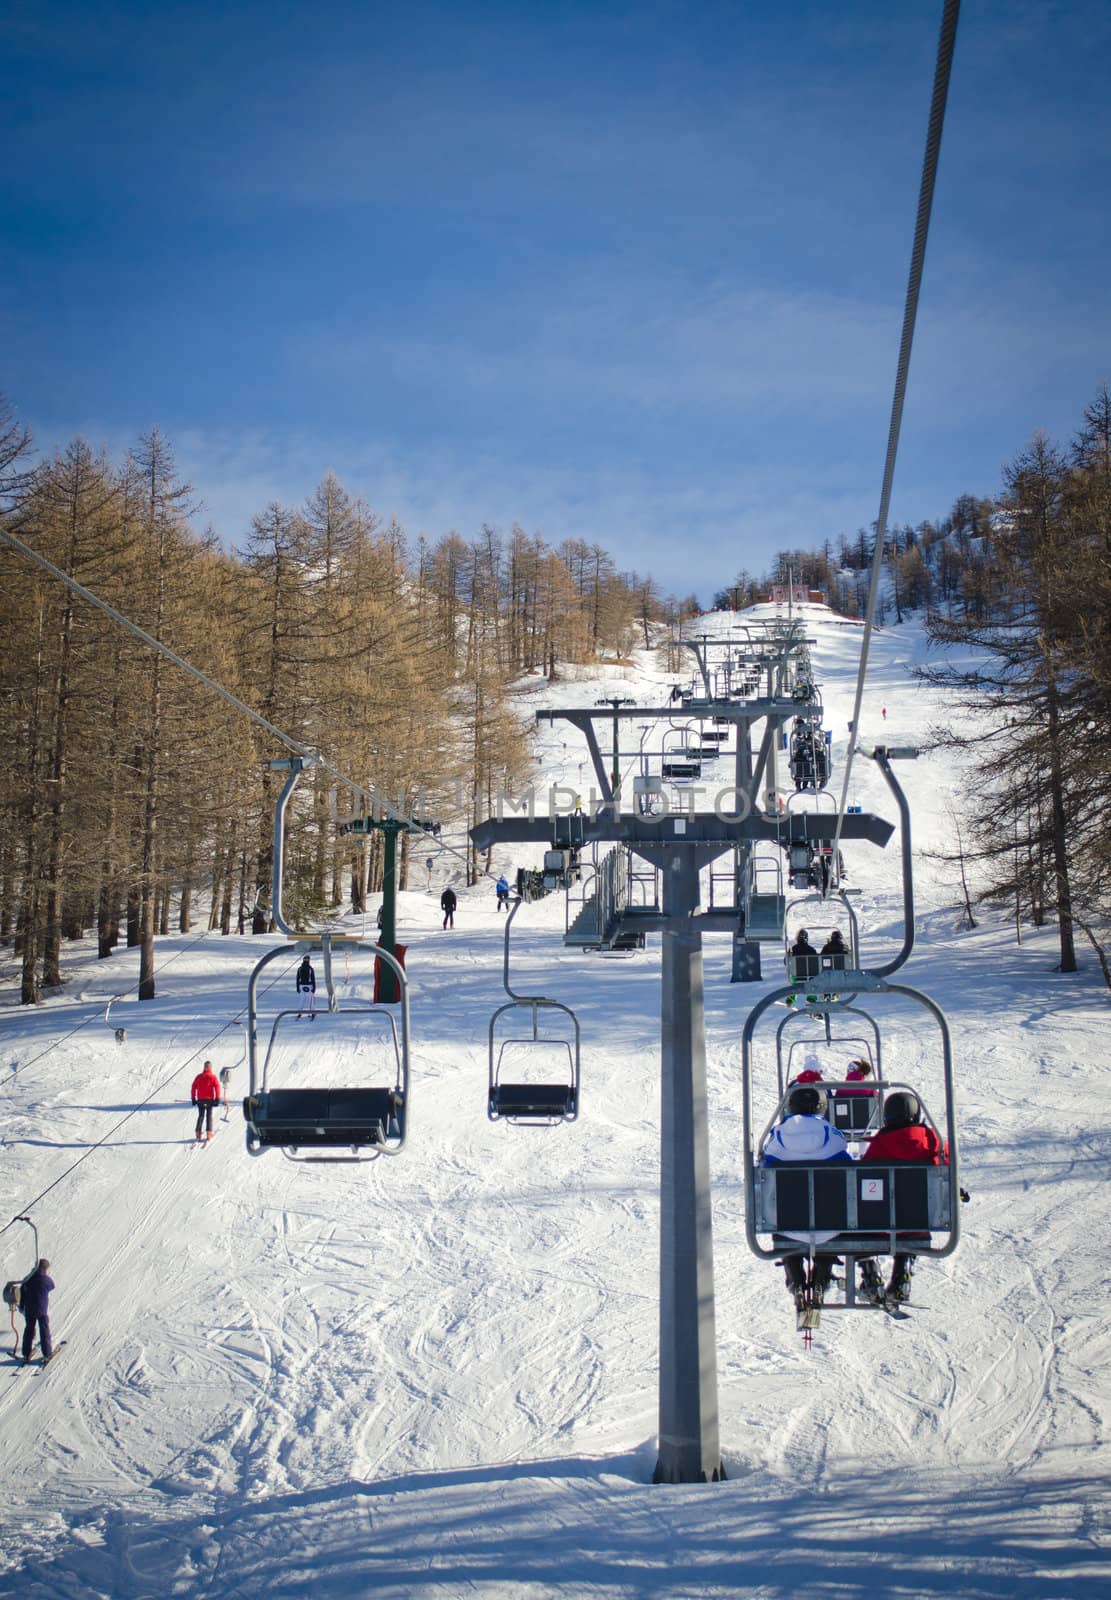 People and skiers on chairlift (aerial lift) and skilift in sunny day